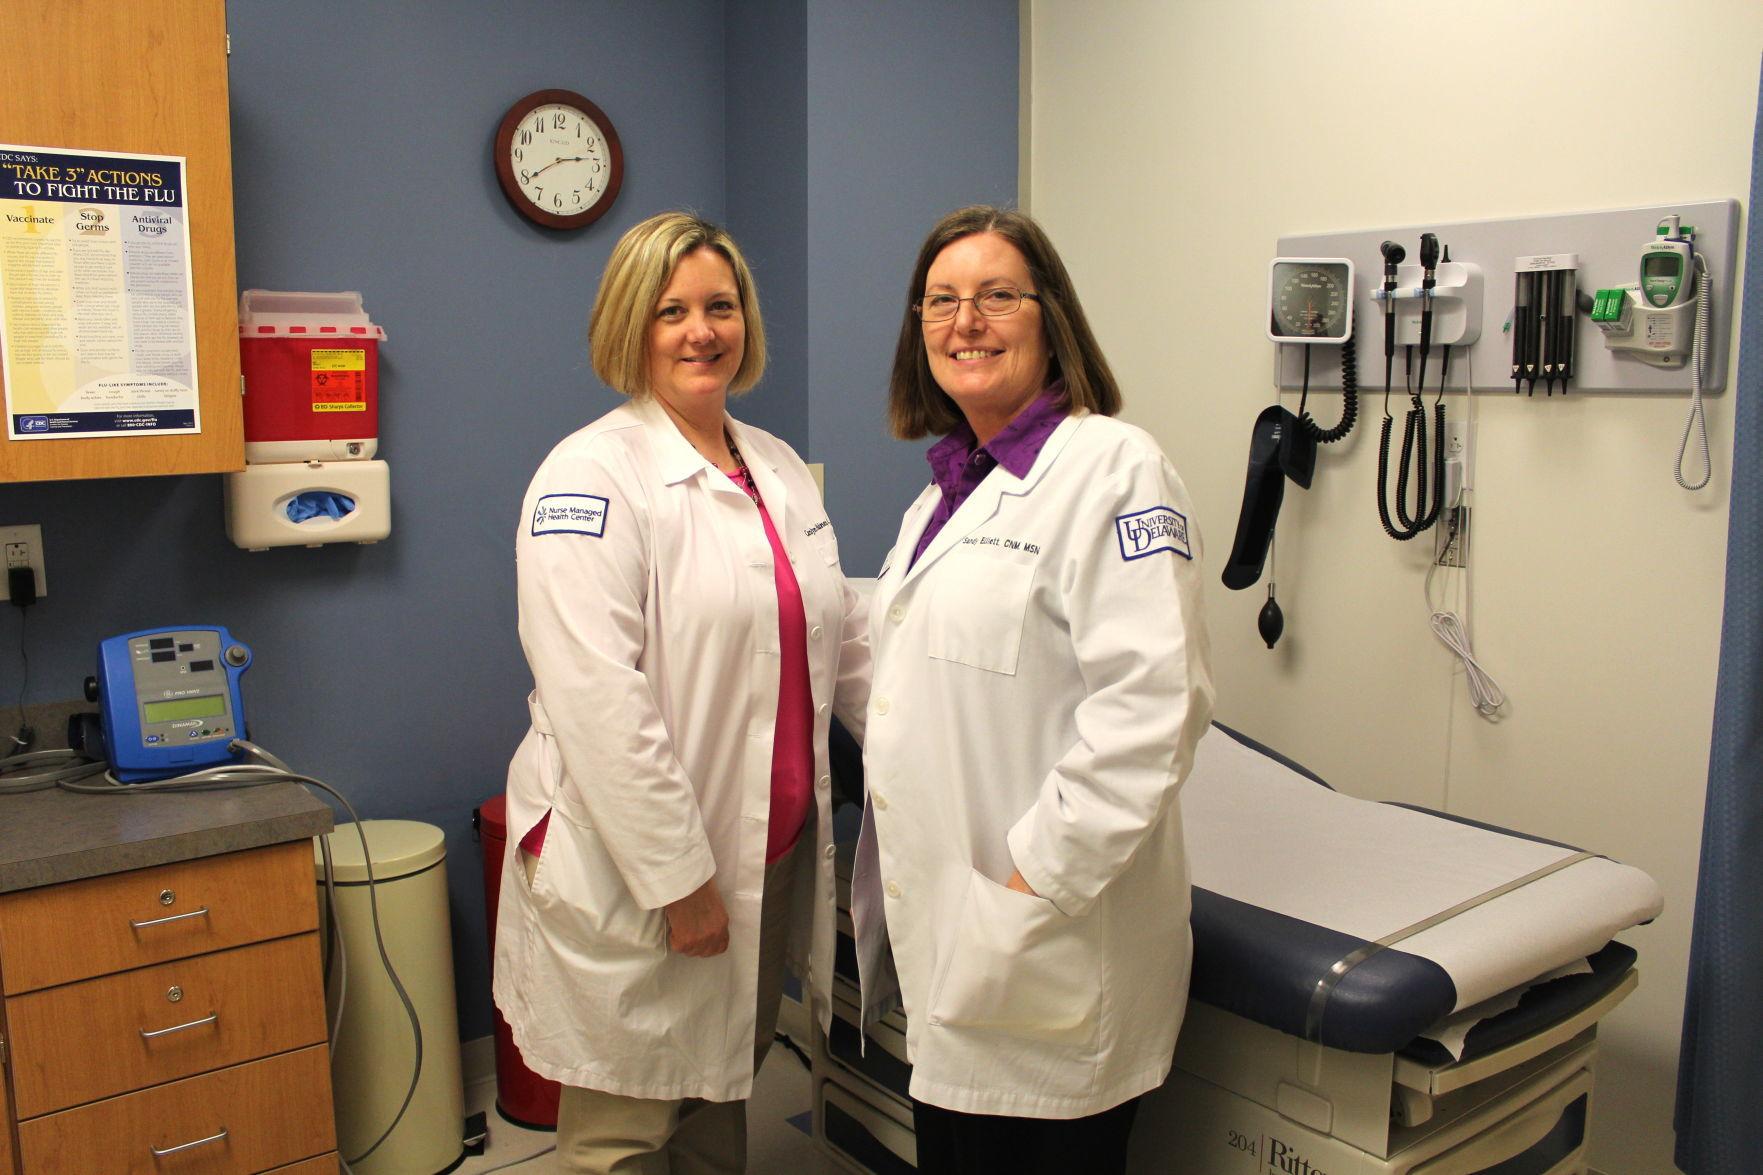 UD's STAR Health expands women's services | News | newarkpostonline.com